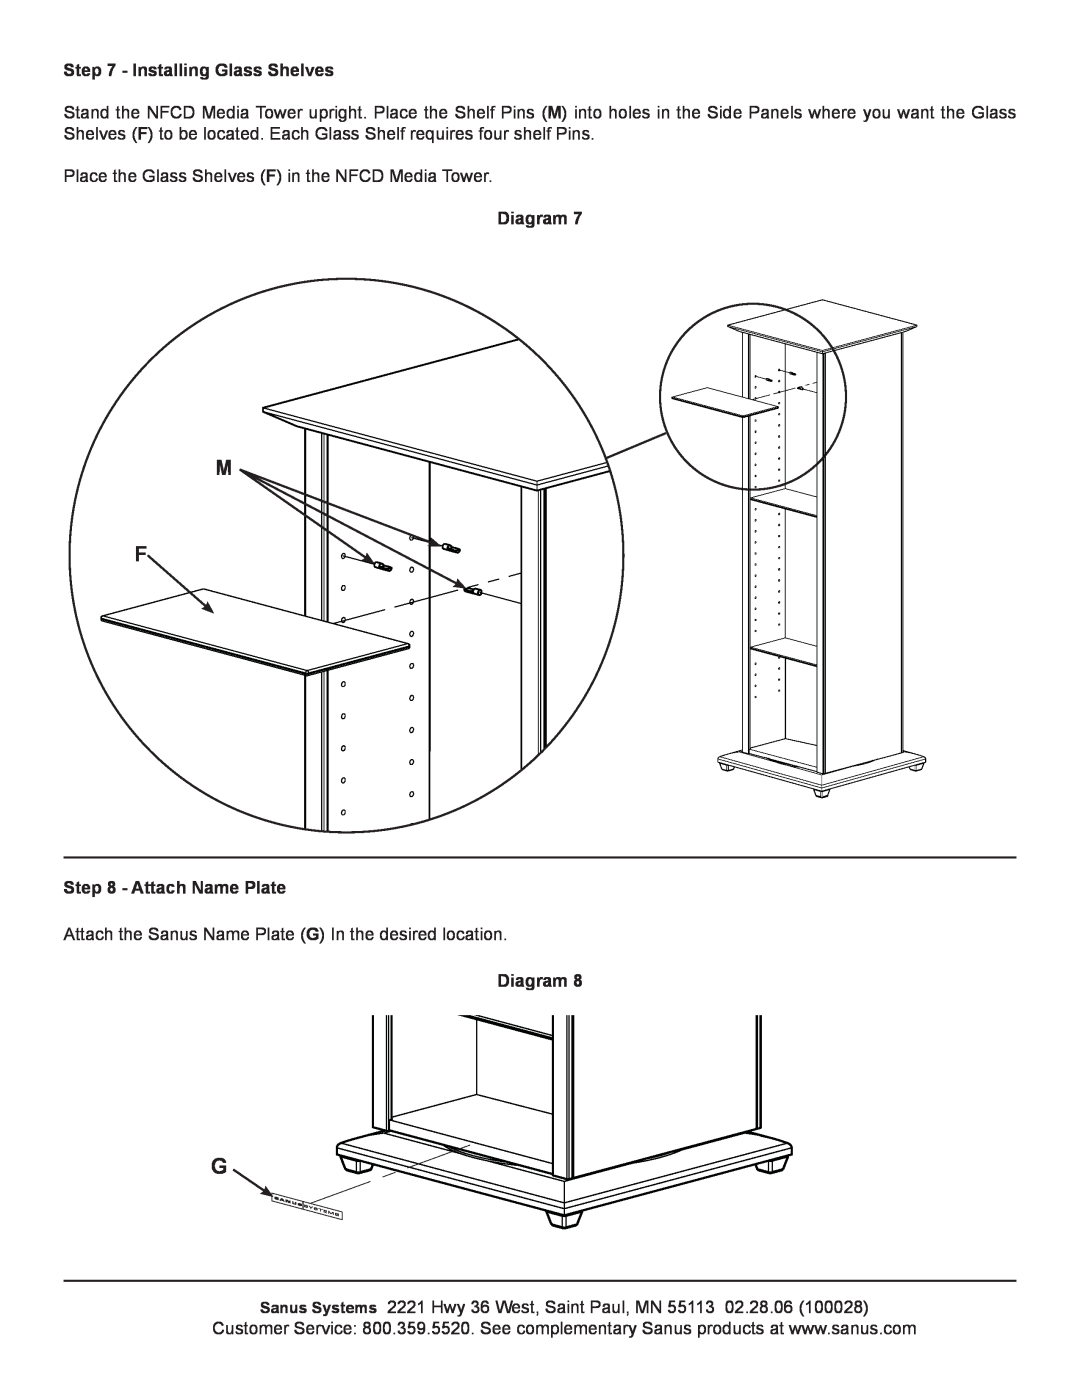 Sanus Systems NFCD manual Installing Glass Shelves, Diagram, Attach Name Plate 